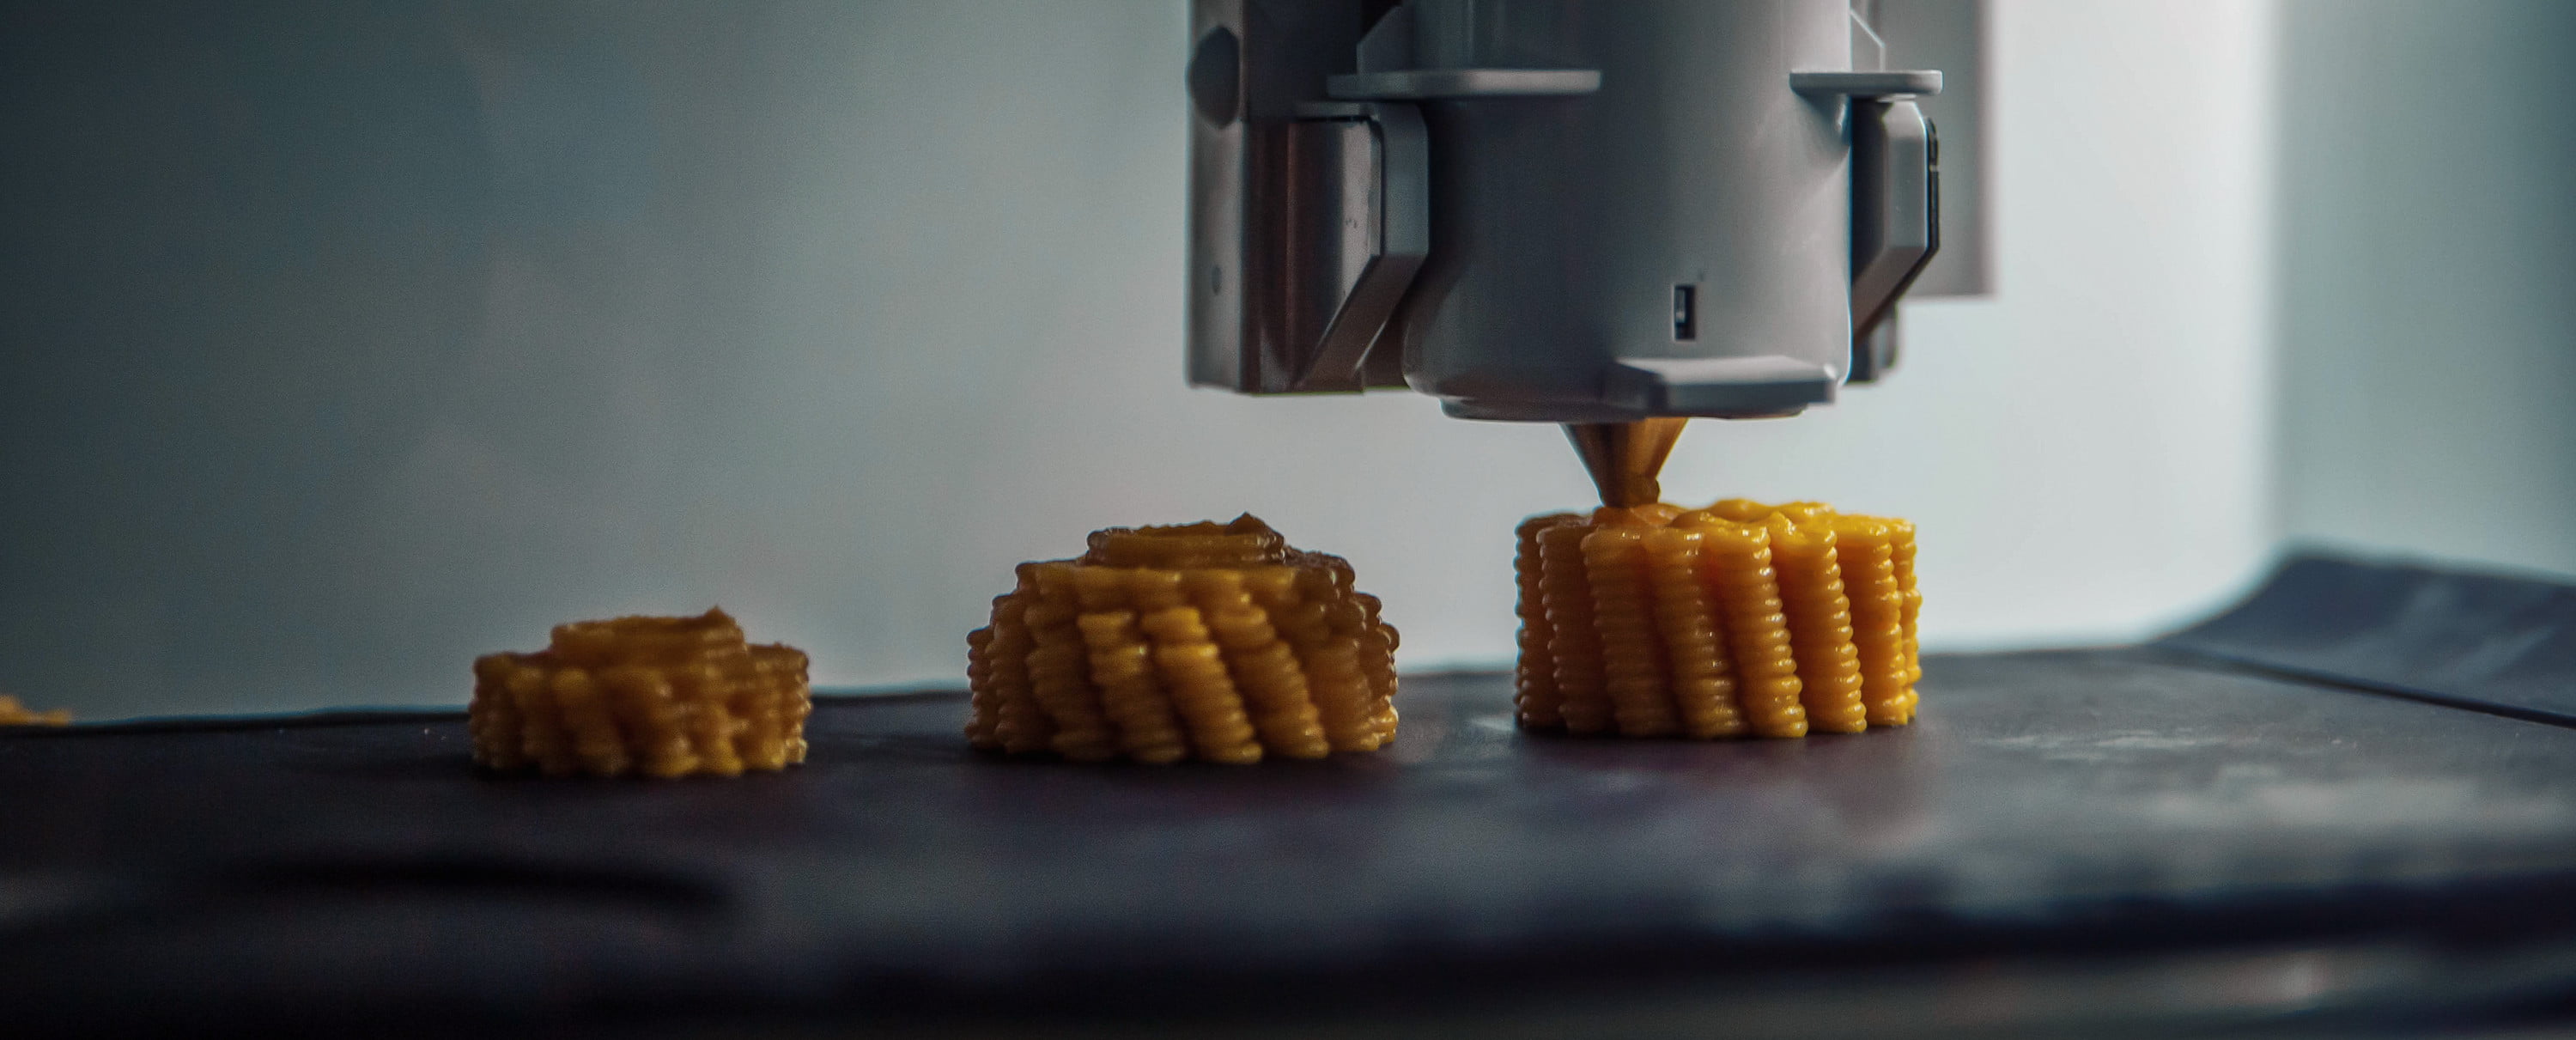 3D Food Printers: How They Could Change What You Eat | Digital Trends